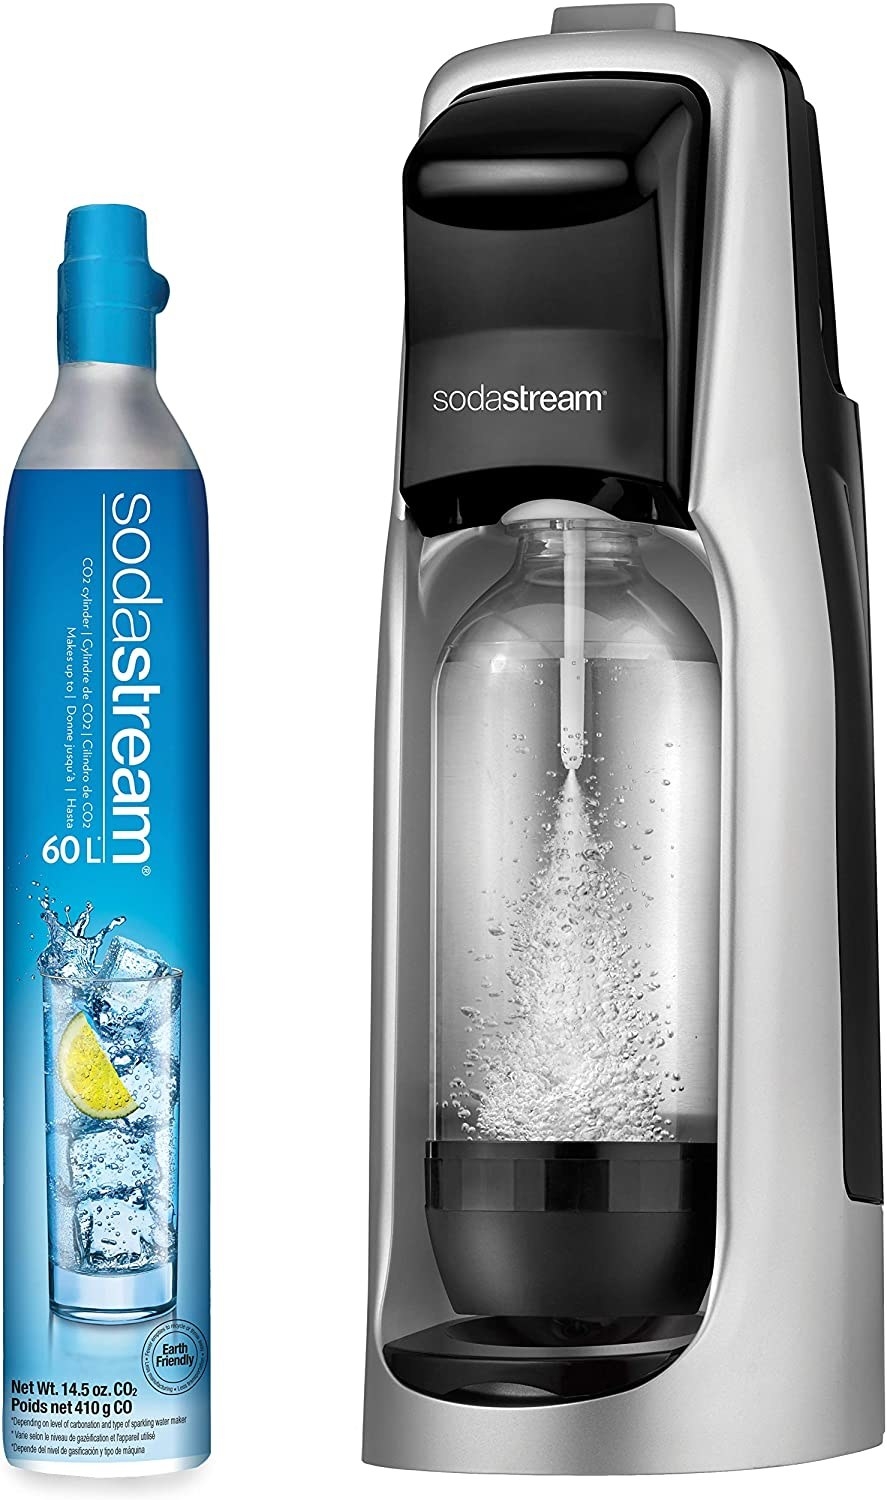 silver soda stream and CO2 bottle